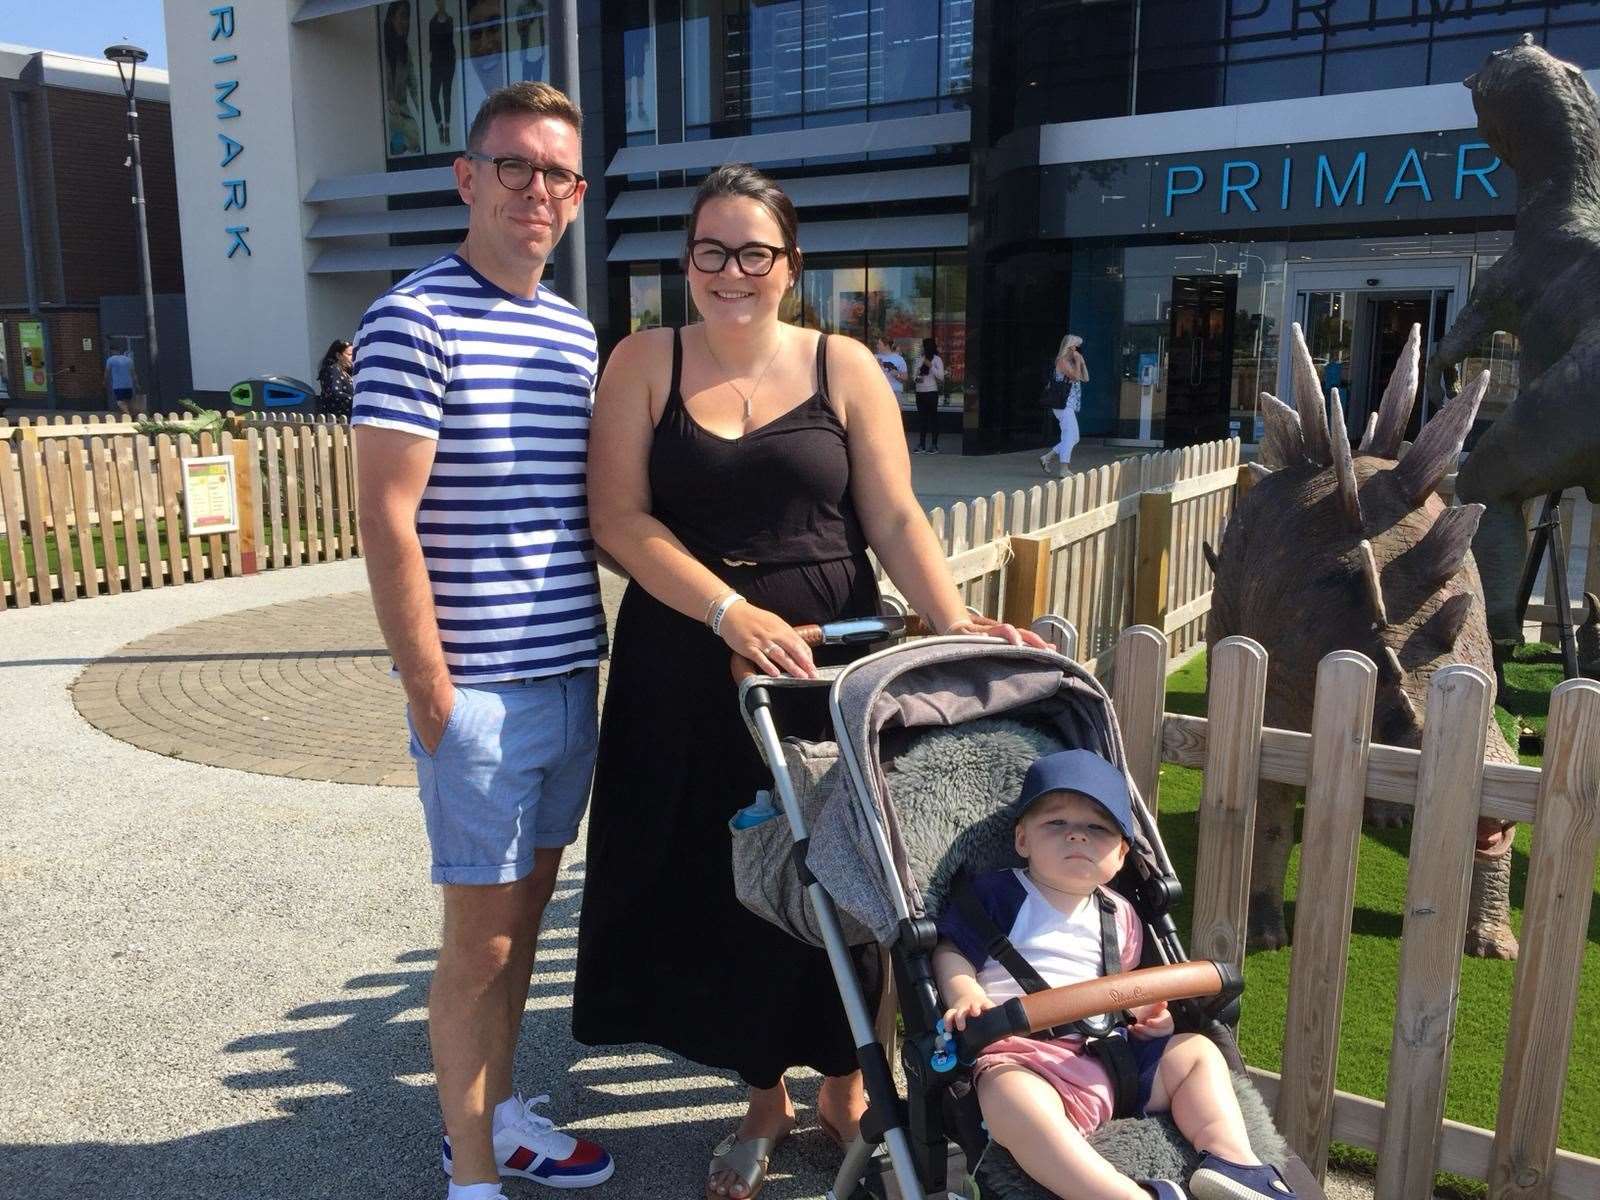 Amy Ashfield, 35 James Gallagher, 34, and Stanley Gallagher, 17 months